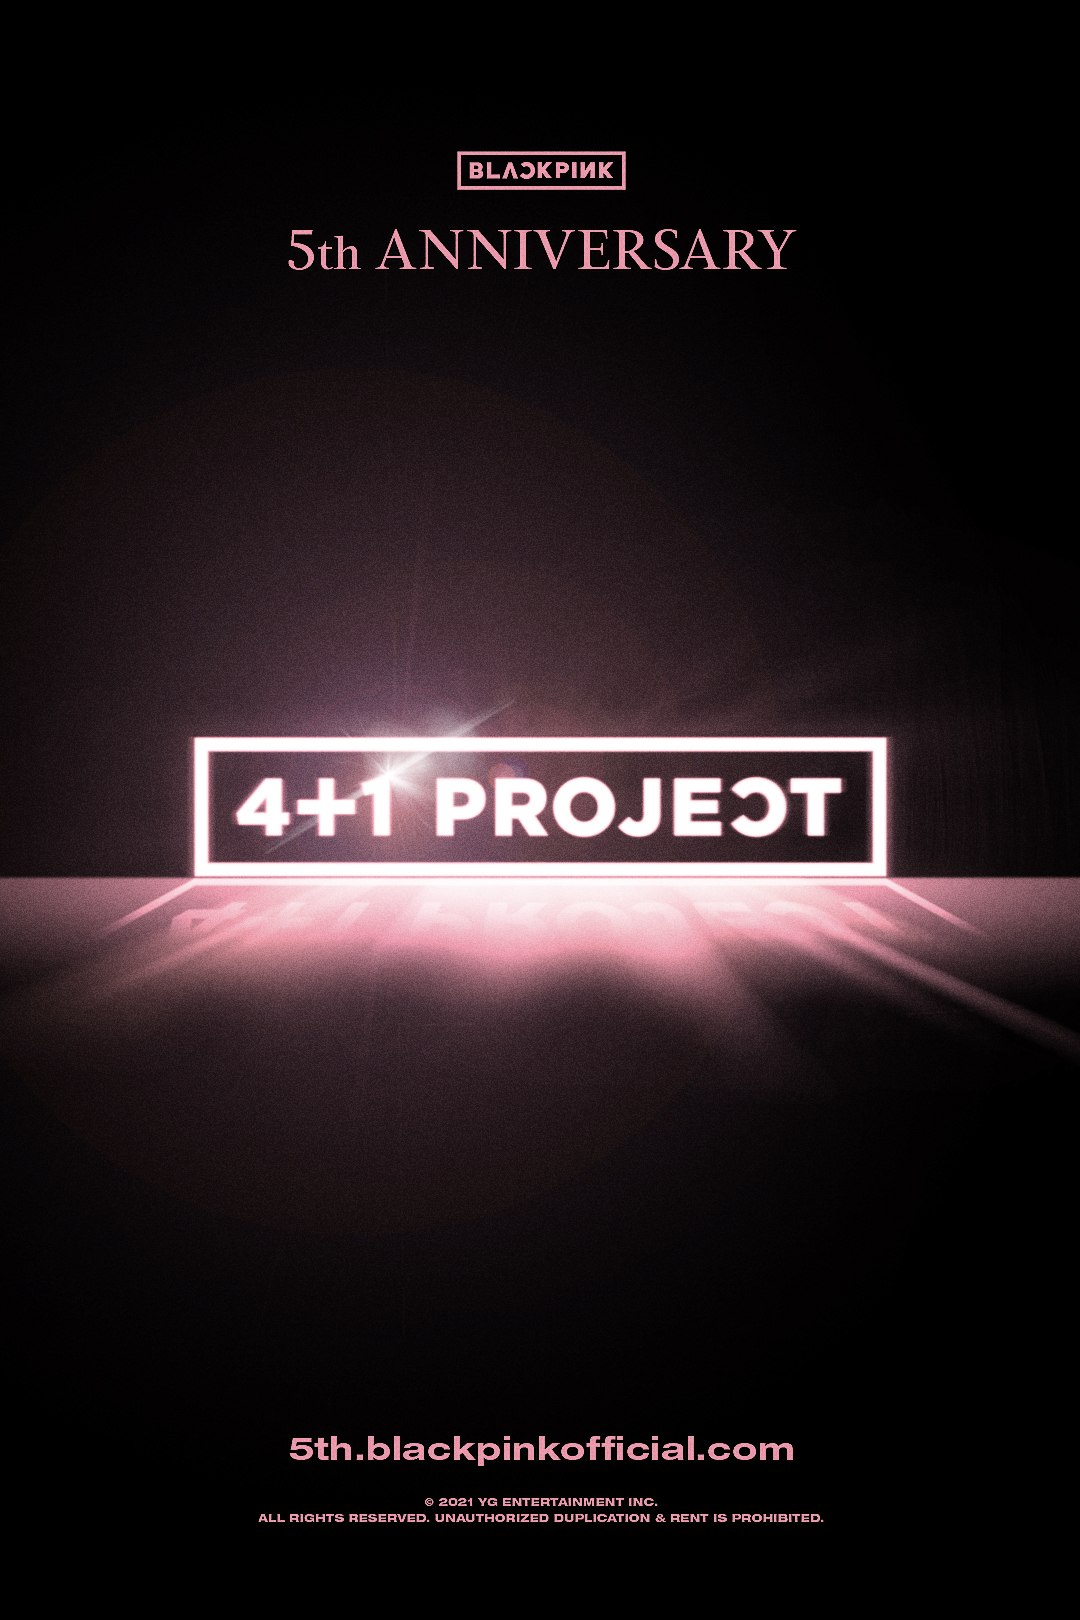 blackpink the movie - 4+1 project